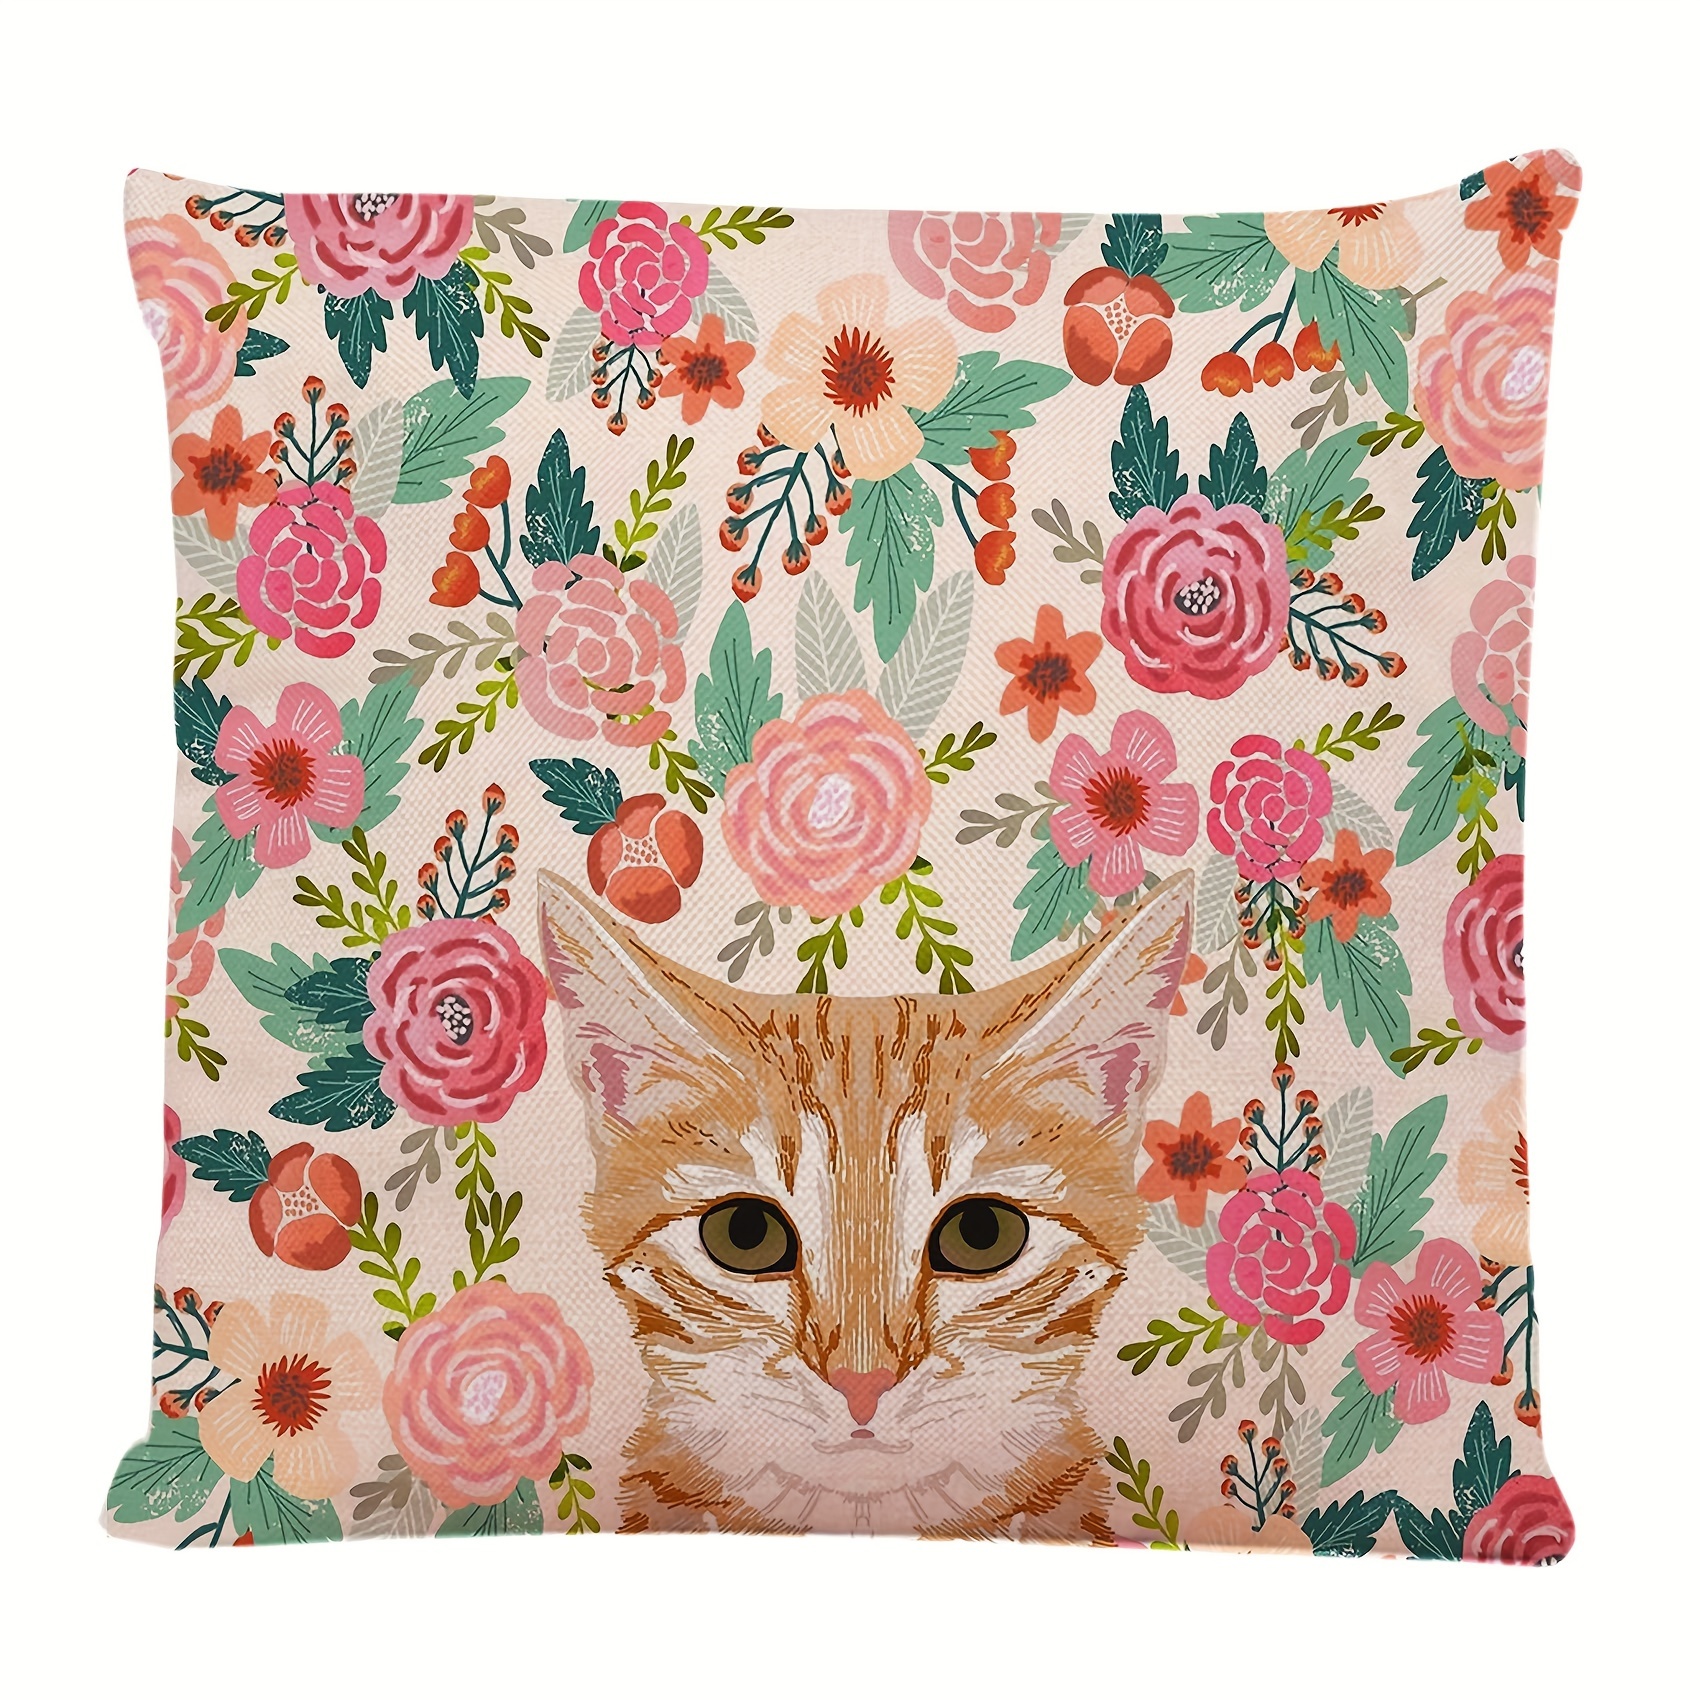 

1pc Throw Pillow Cover Orange Portrait Cat Spring Florals Cute Lady Person Square Decorative Throw Pillow Cushion Case For Home Couch Living Room Bed Sofa Car Pillowcase 18x18 Inch